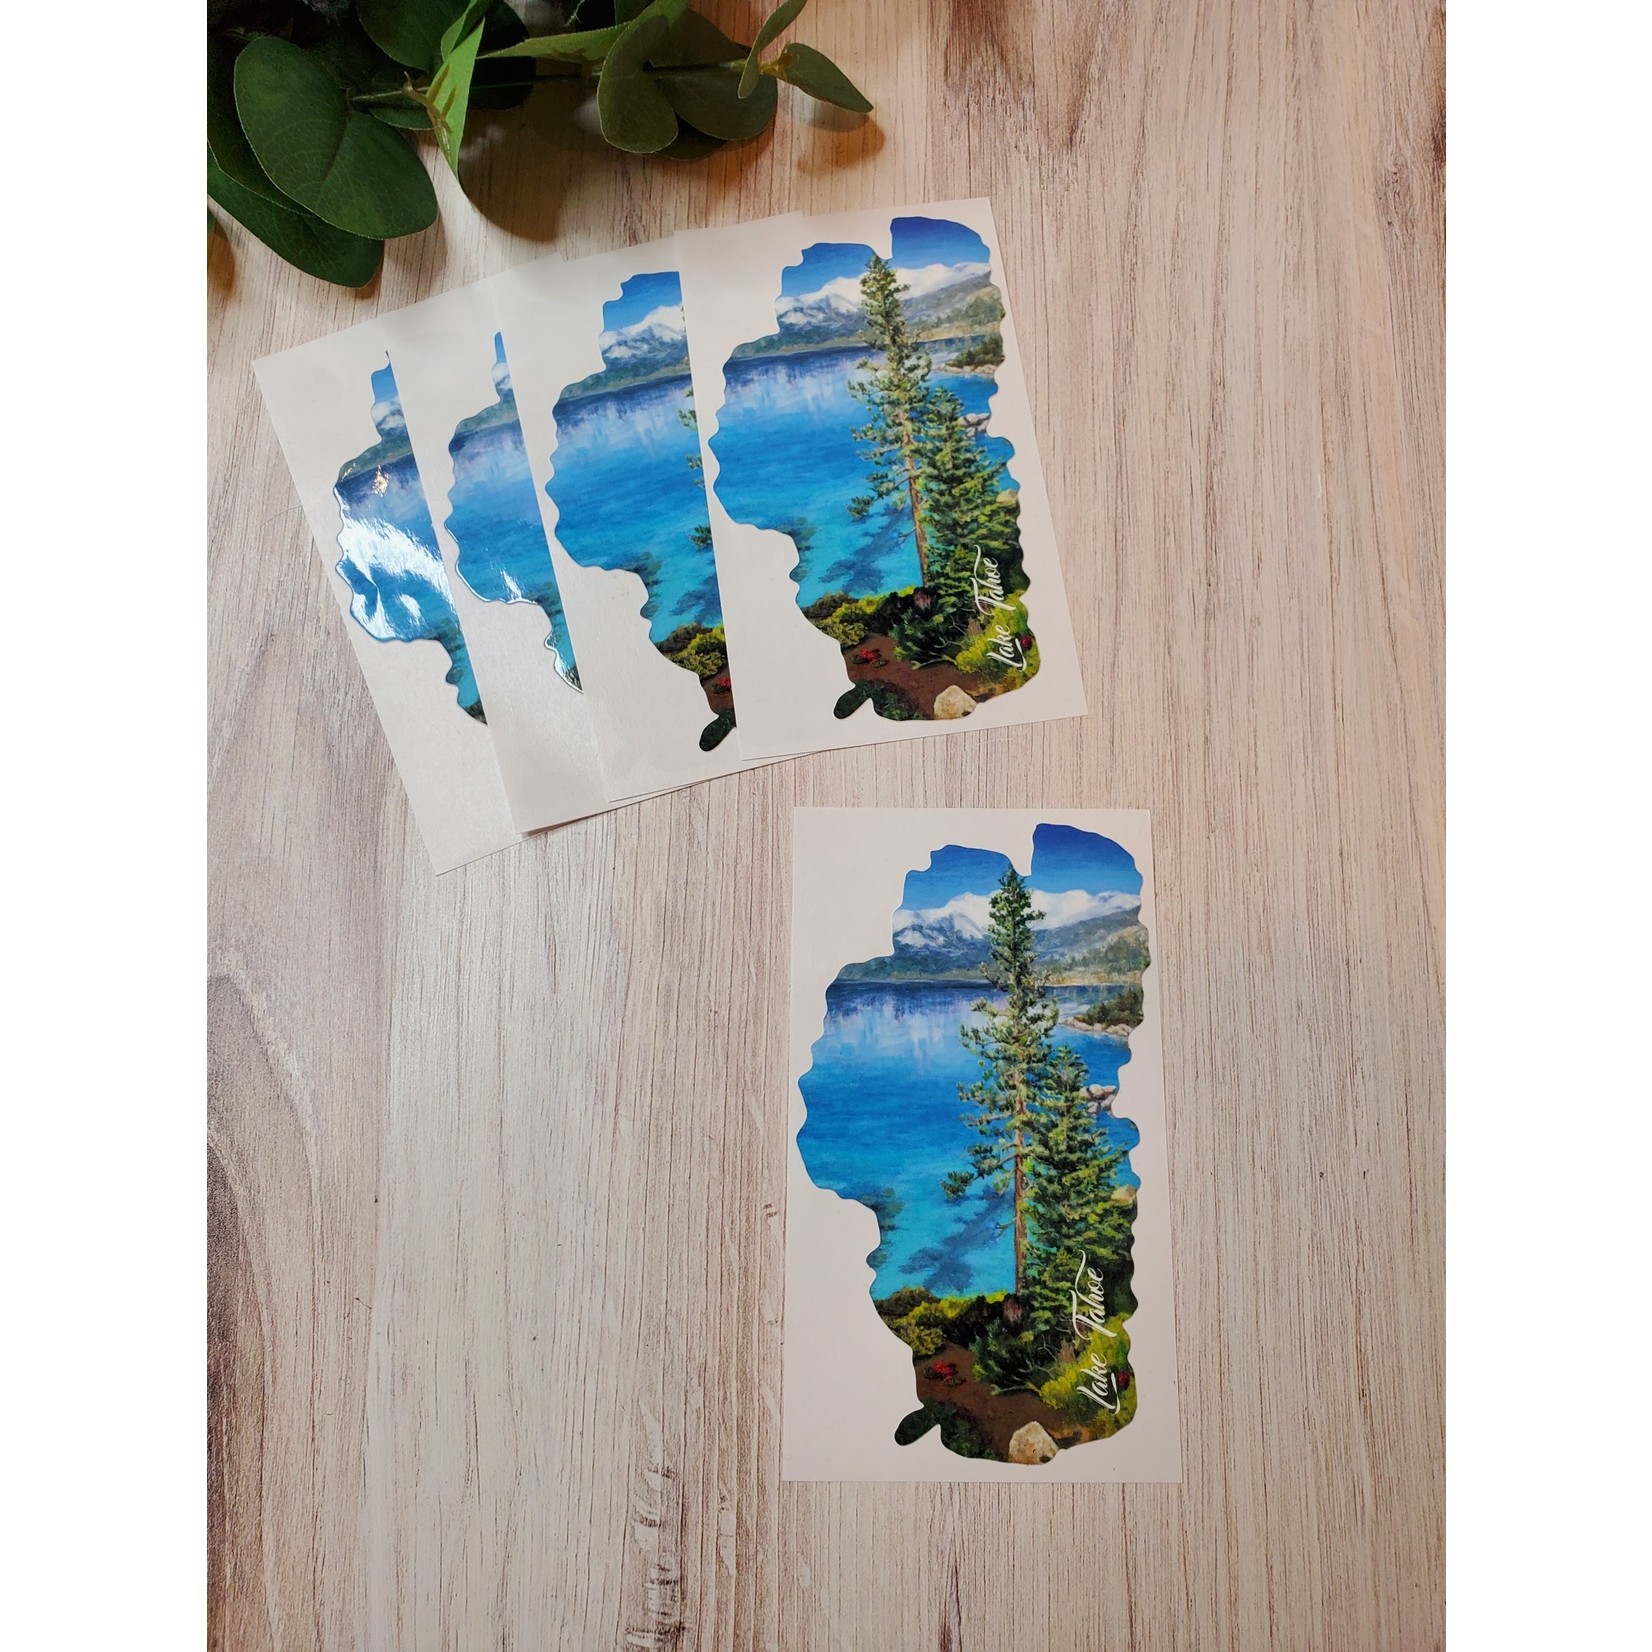 Kelley Werner Arts East Shore - Lake Tahoe Sticker - with "Lake Tahoe" text